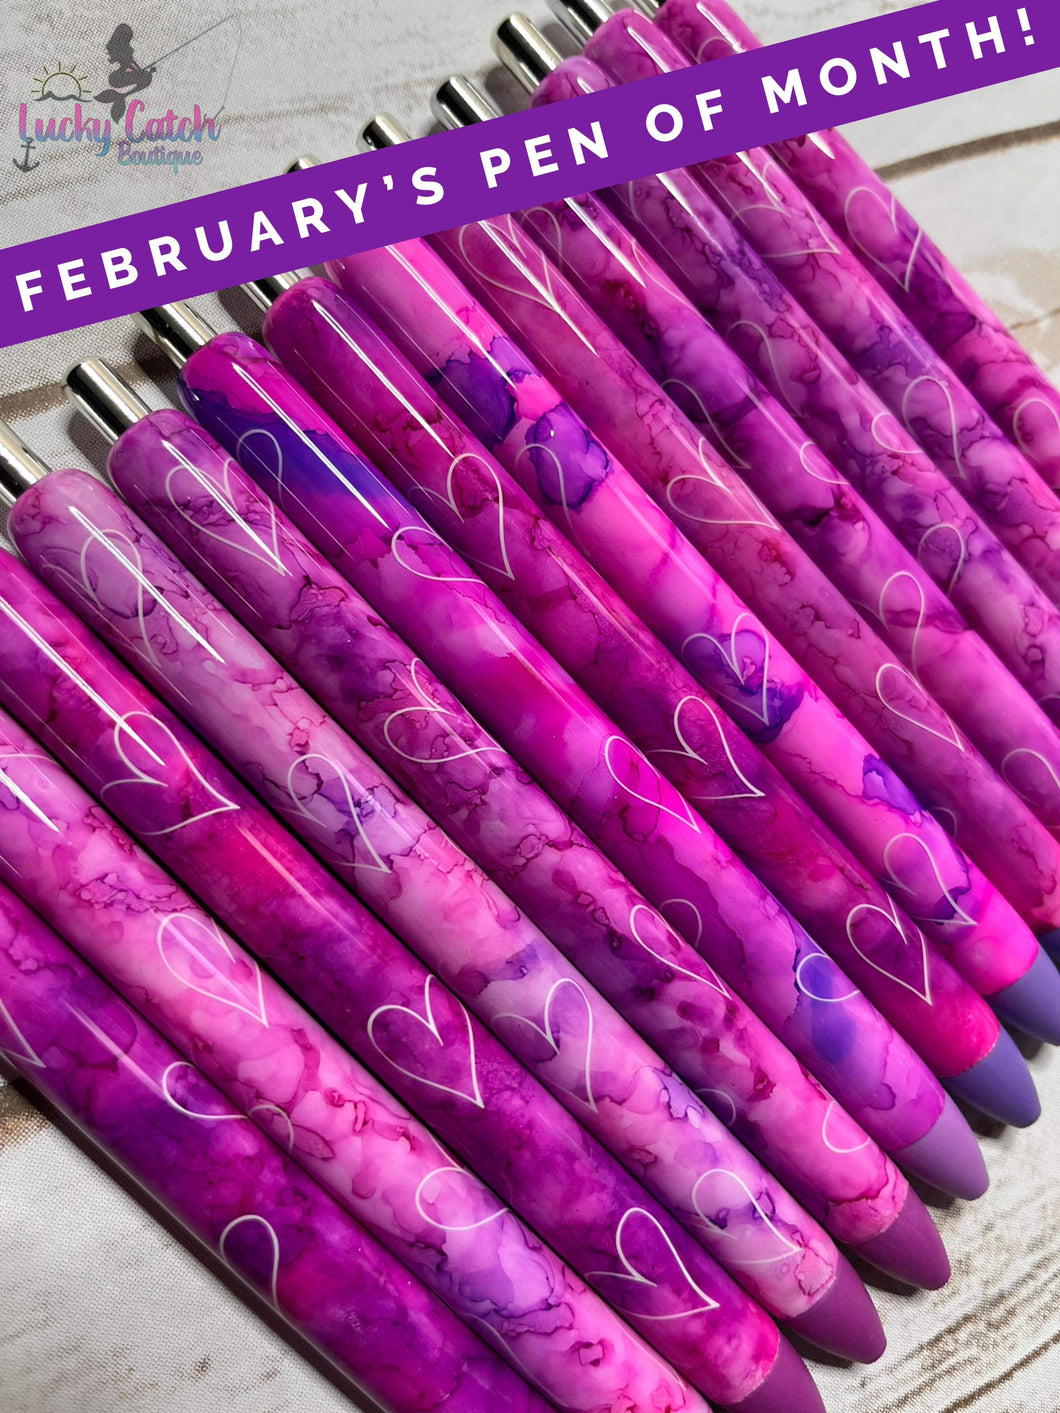 February 2022 - Pen of the Month